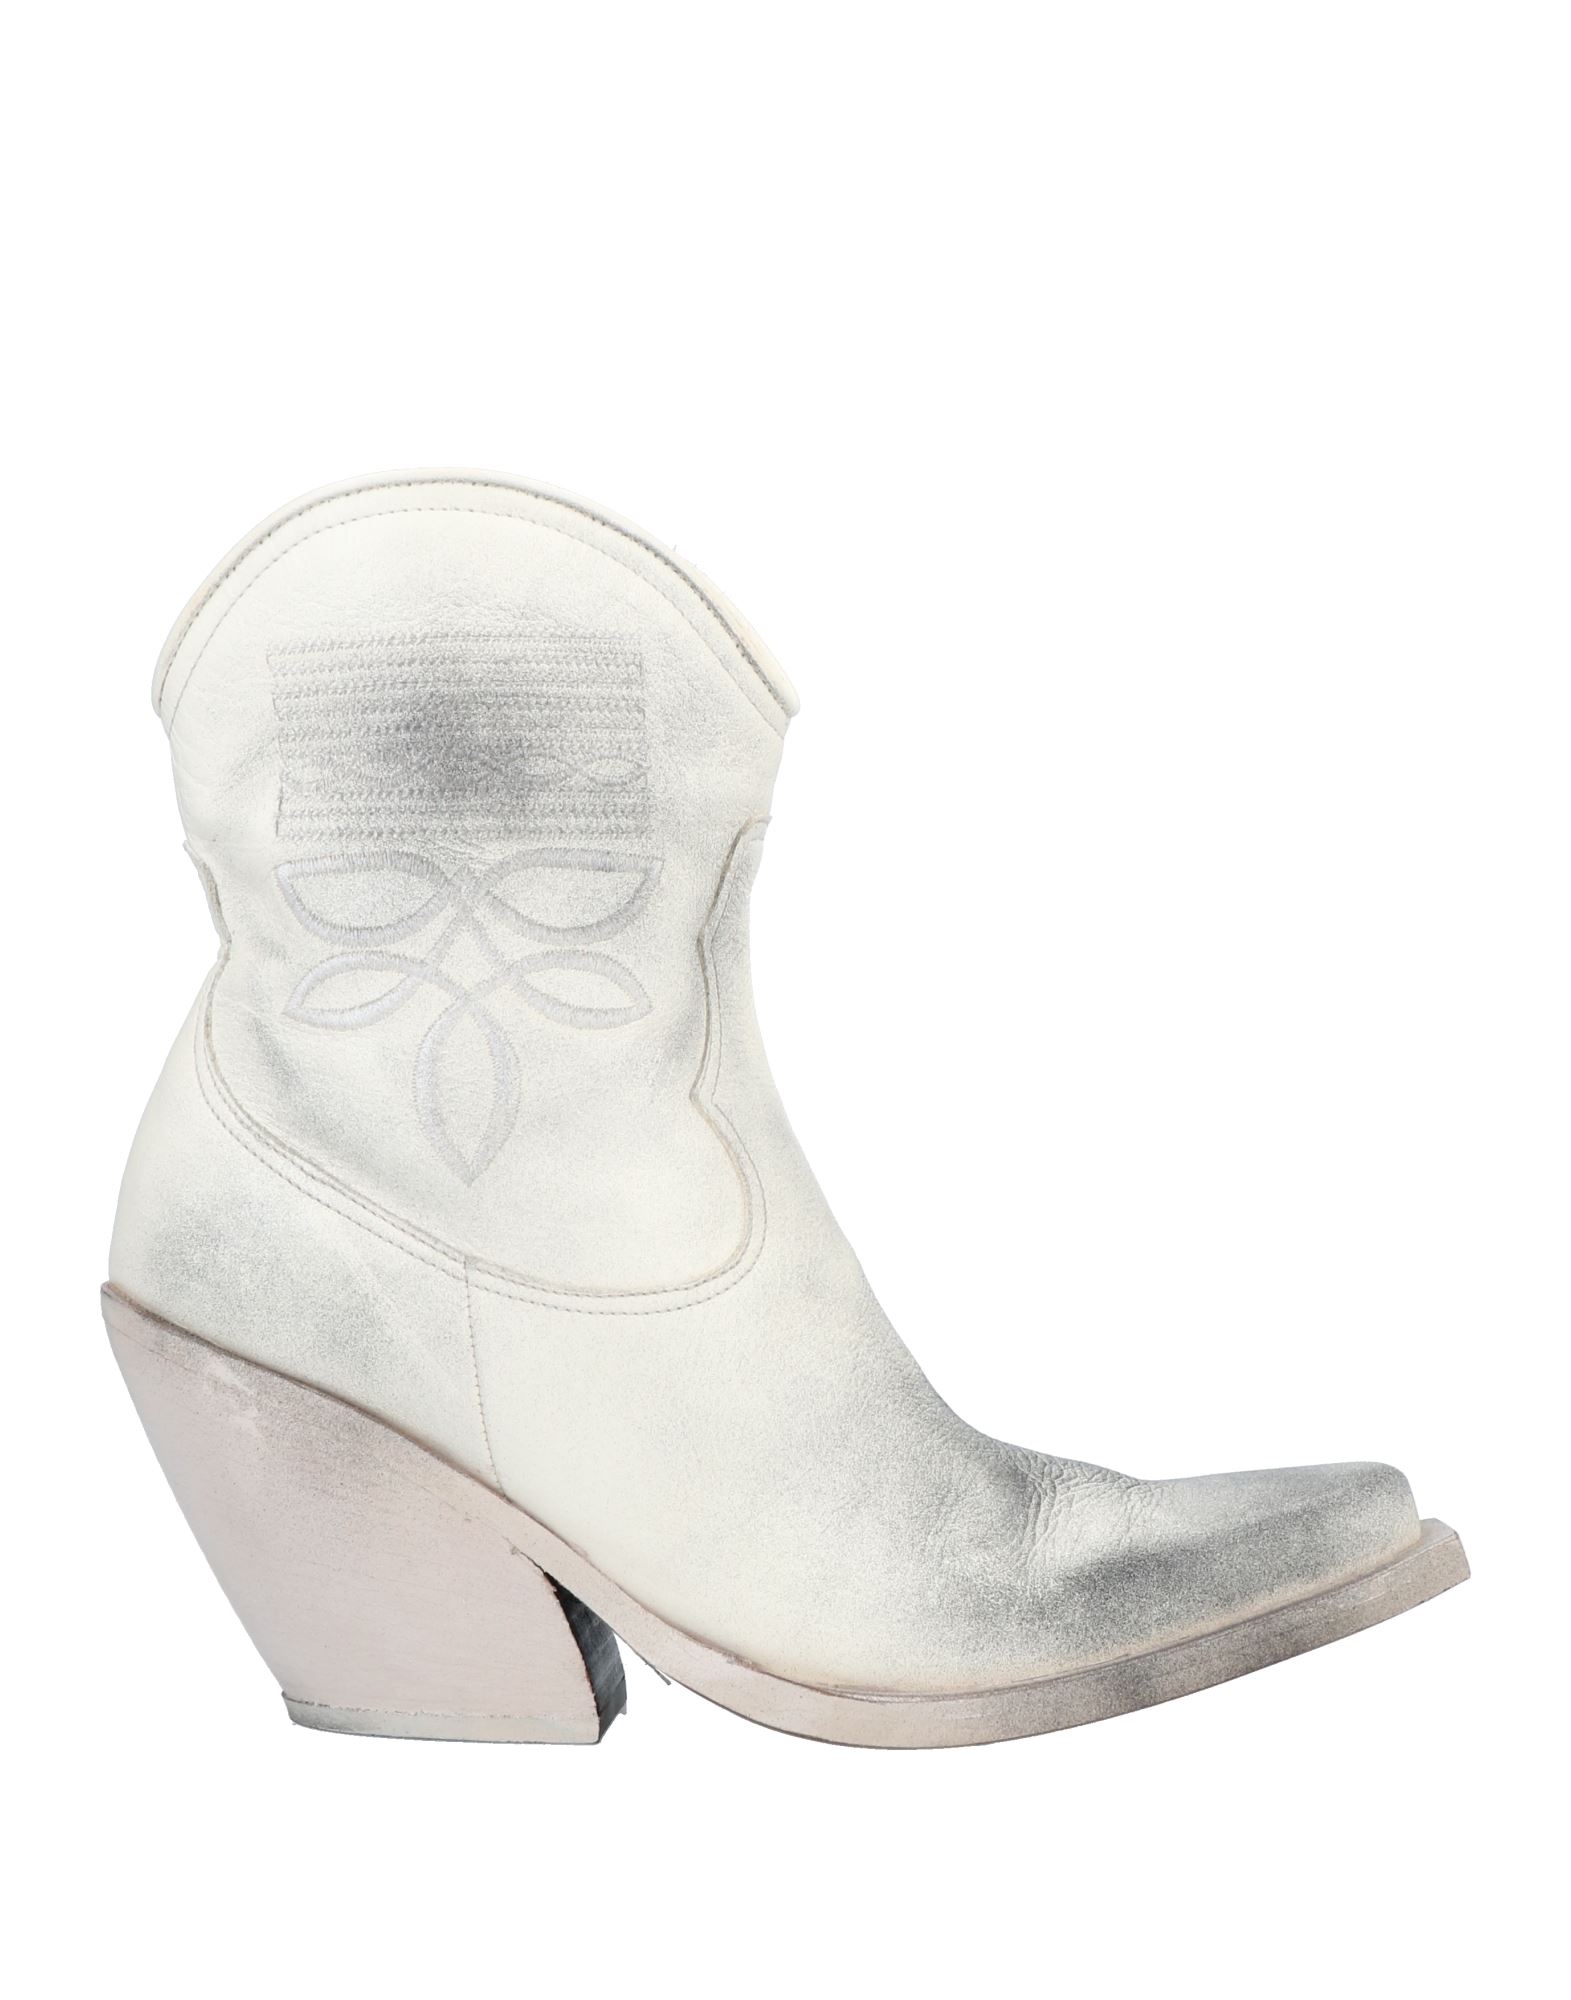 Barracuda Ankle Boots In Light Grey